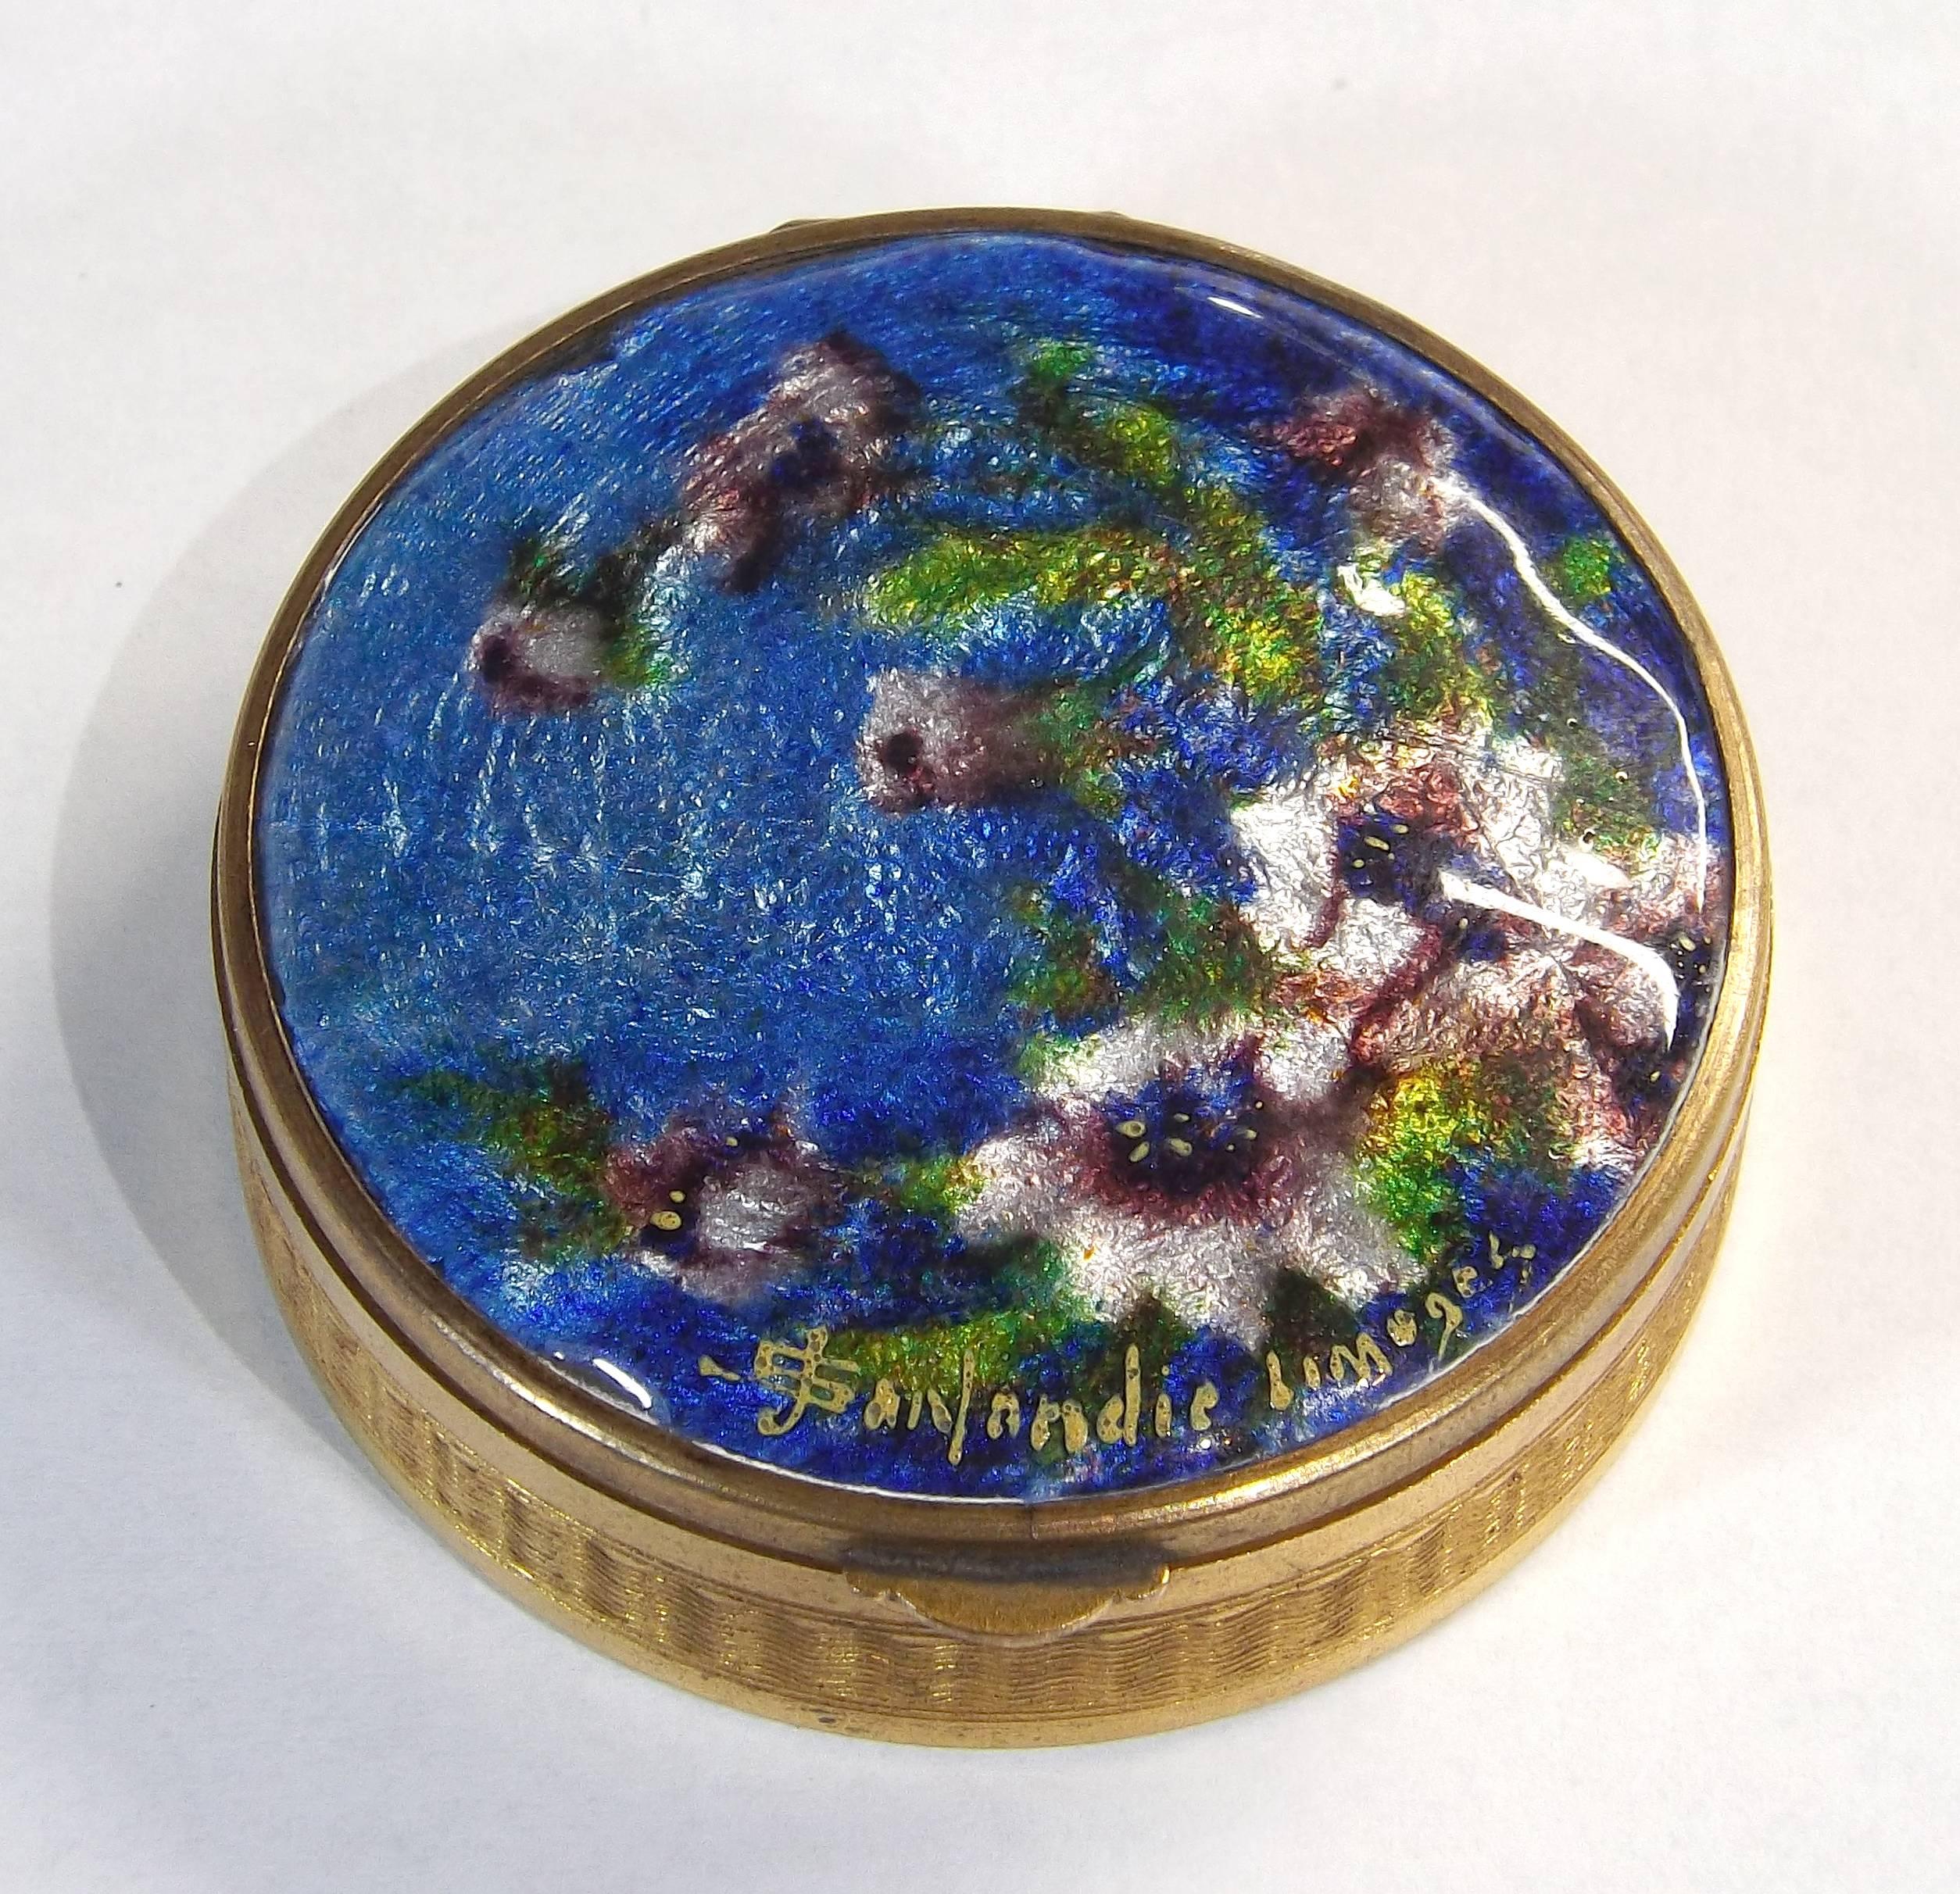 A delicate enameled compact powder box with floral decor by Jules Sarlandie (1874-1936). Of polished brass with a mirror on the inside lid. Excellent condition, measures: 1 3/4 inch diameter.